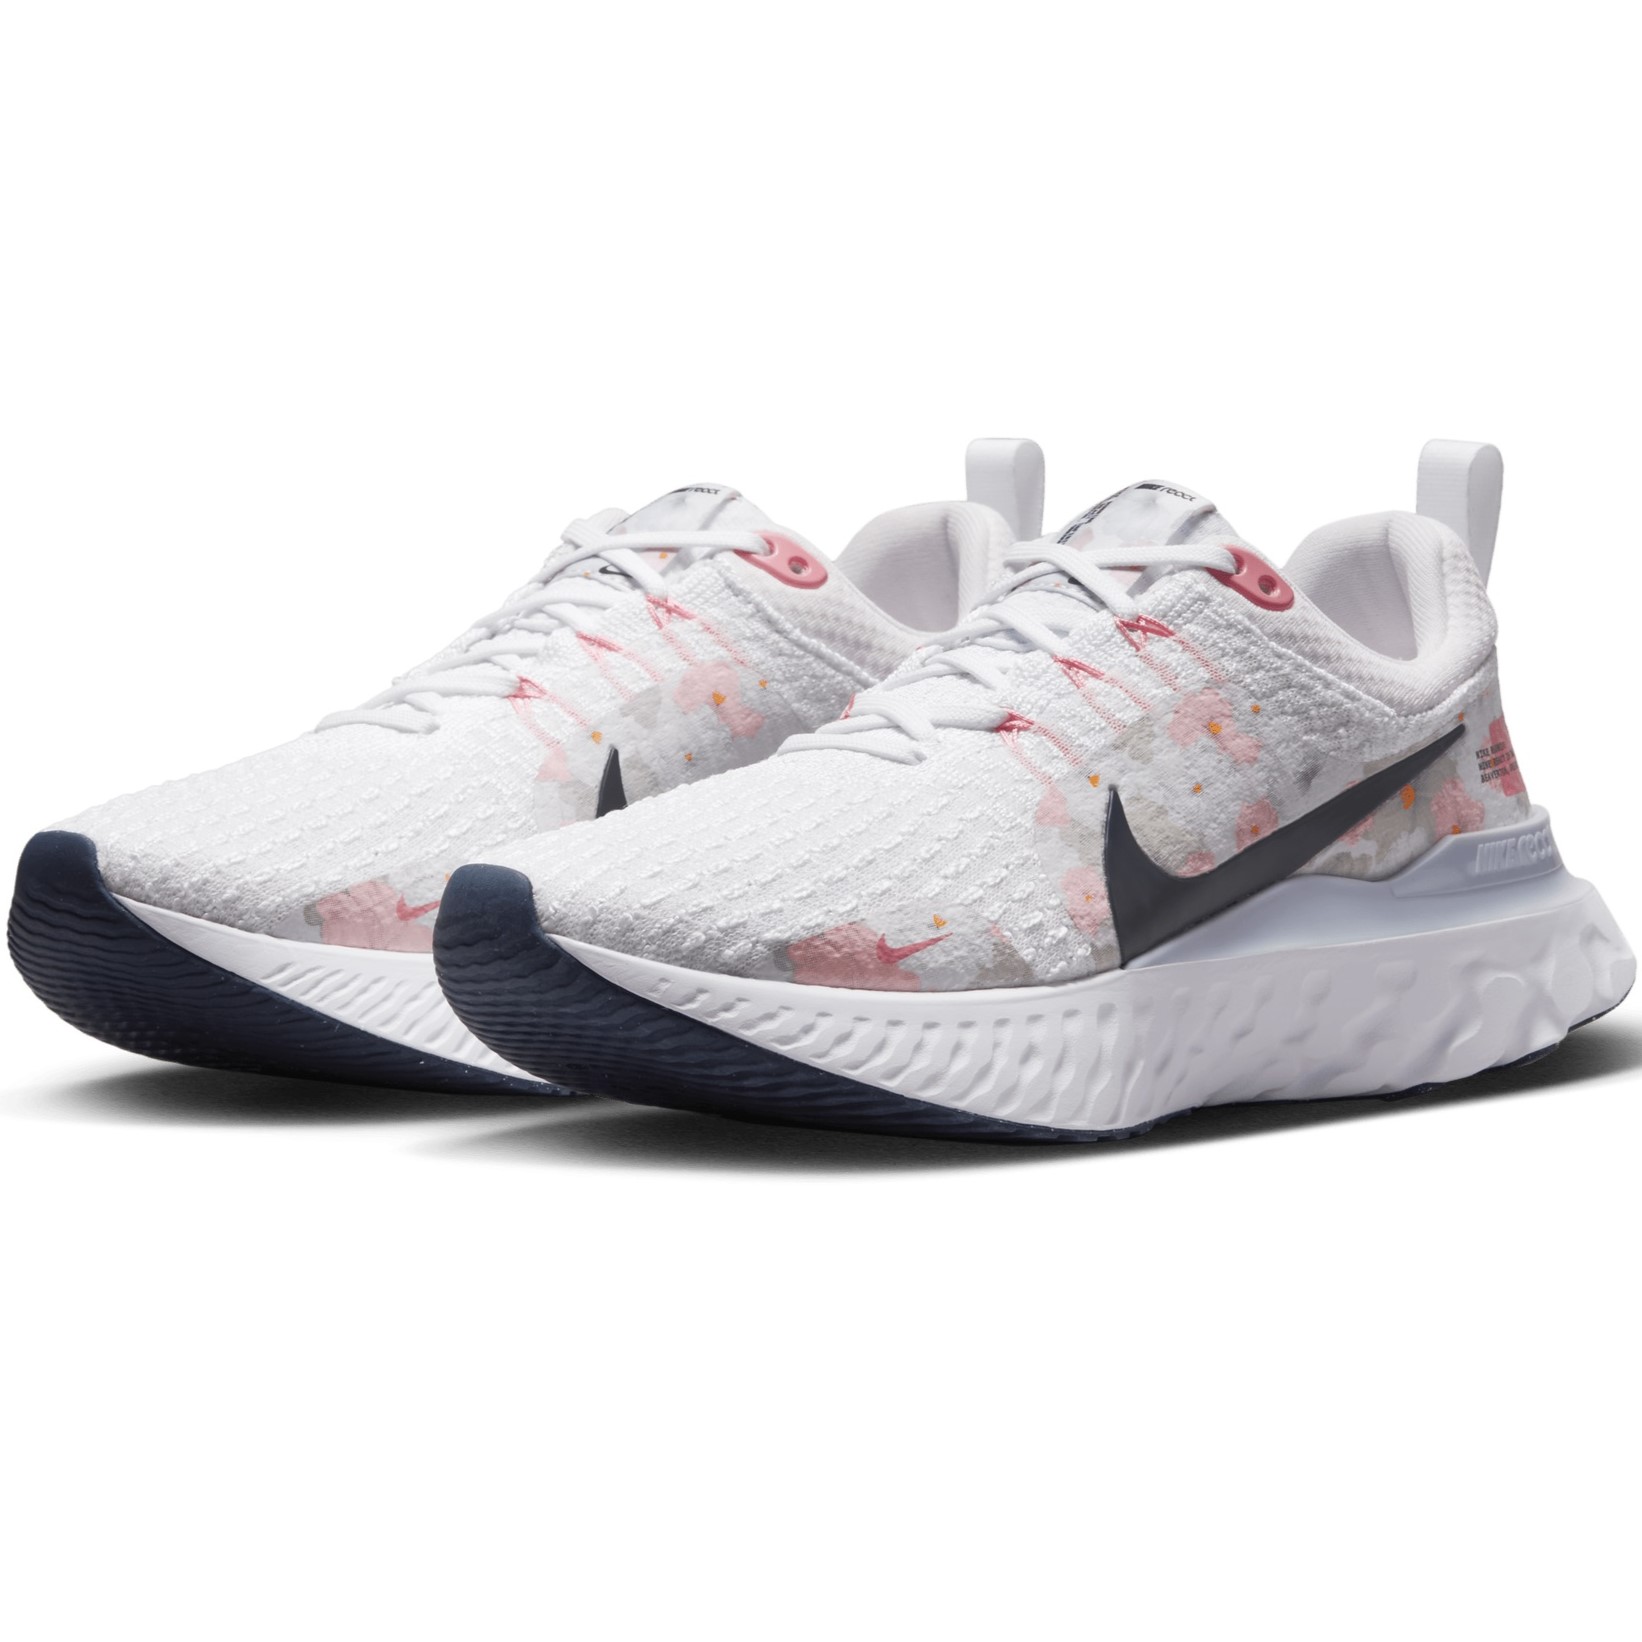 GIÀY THỂ THAO NIKE NỮ REACT INFINITY 3 PREMIUM WHITE PEARL PINK WOMENS ROAD RUNNING SHOES FD4151-100 9